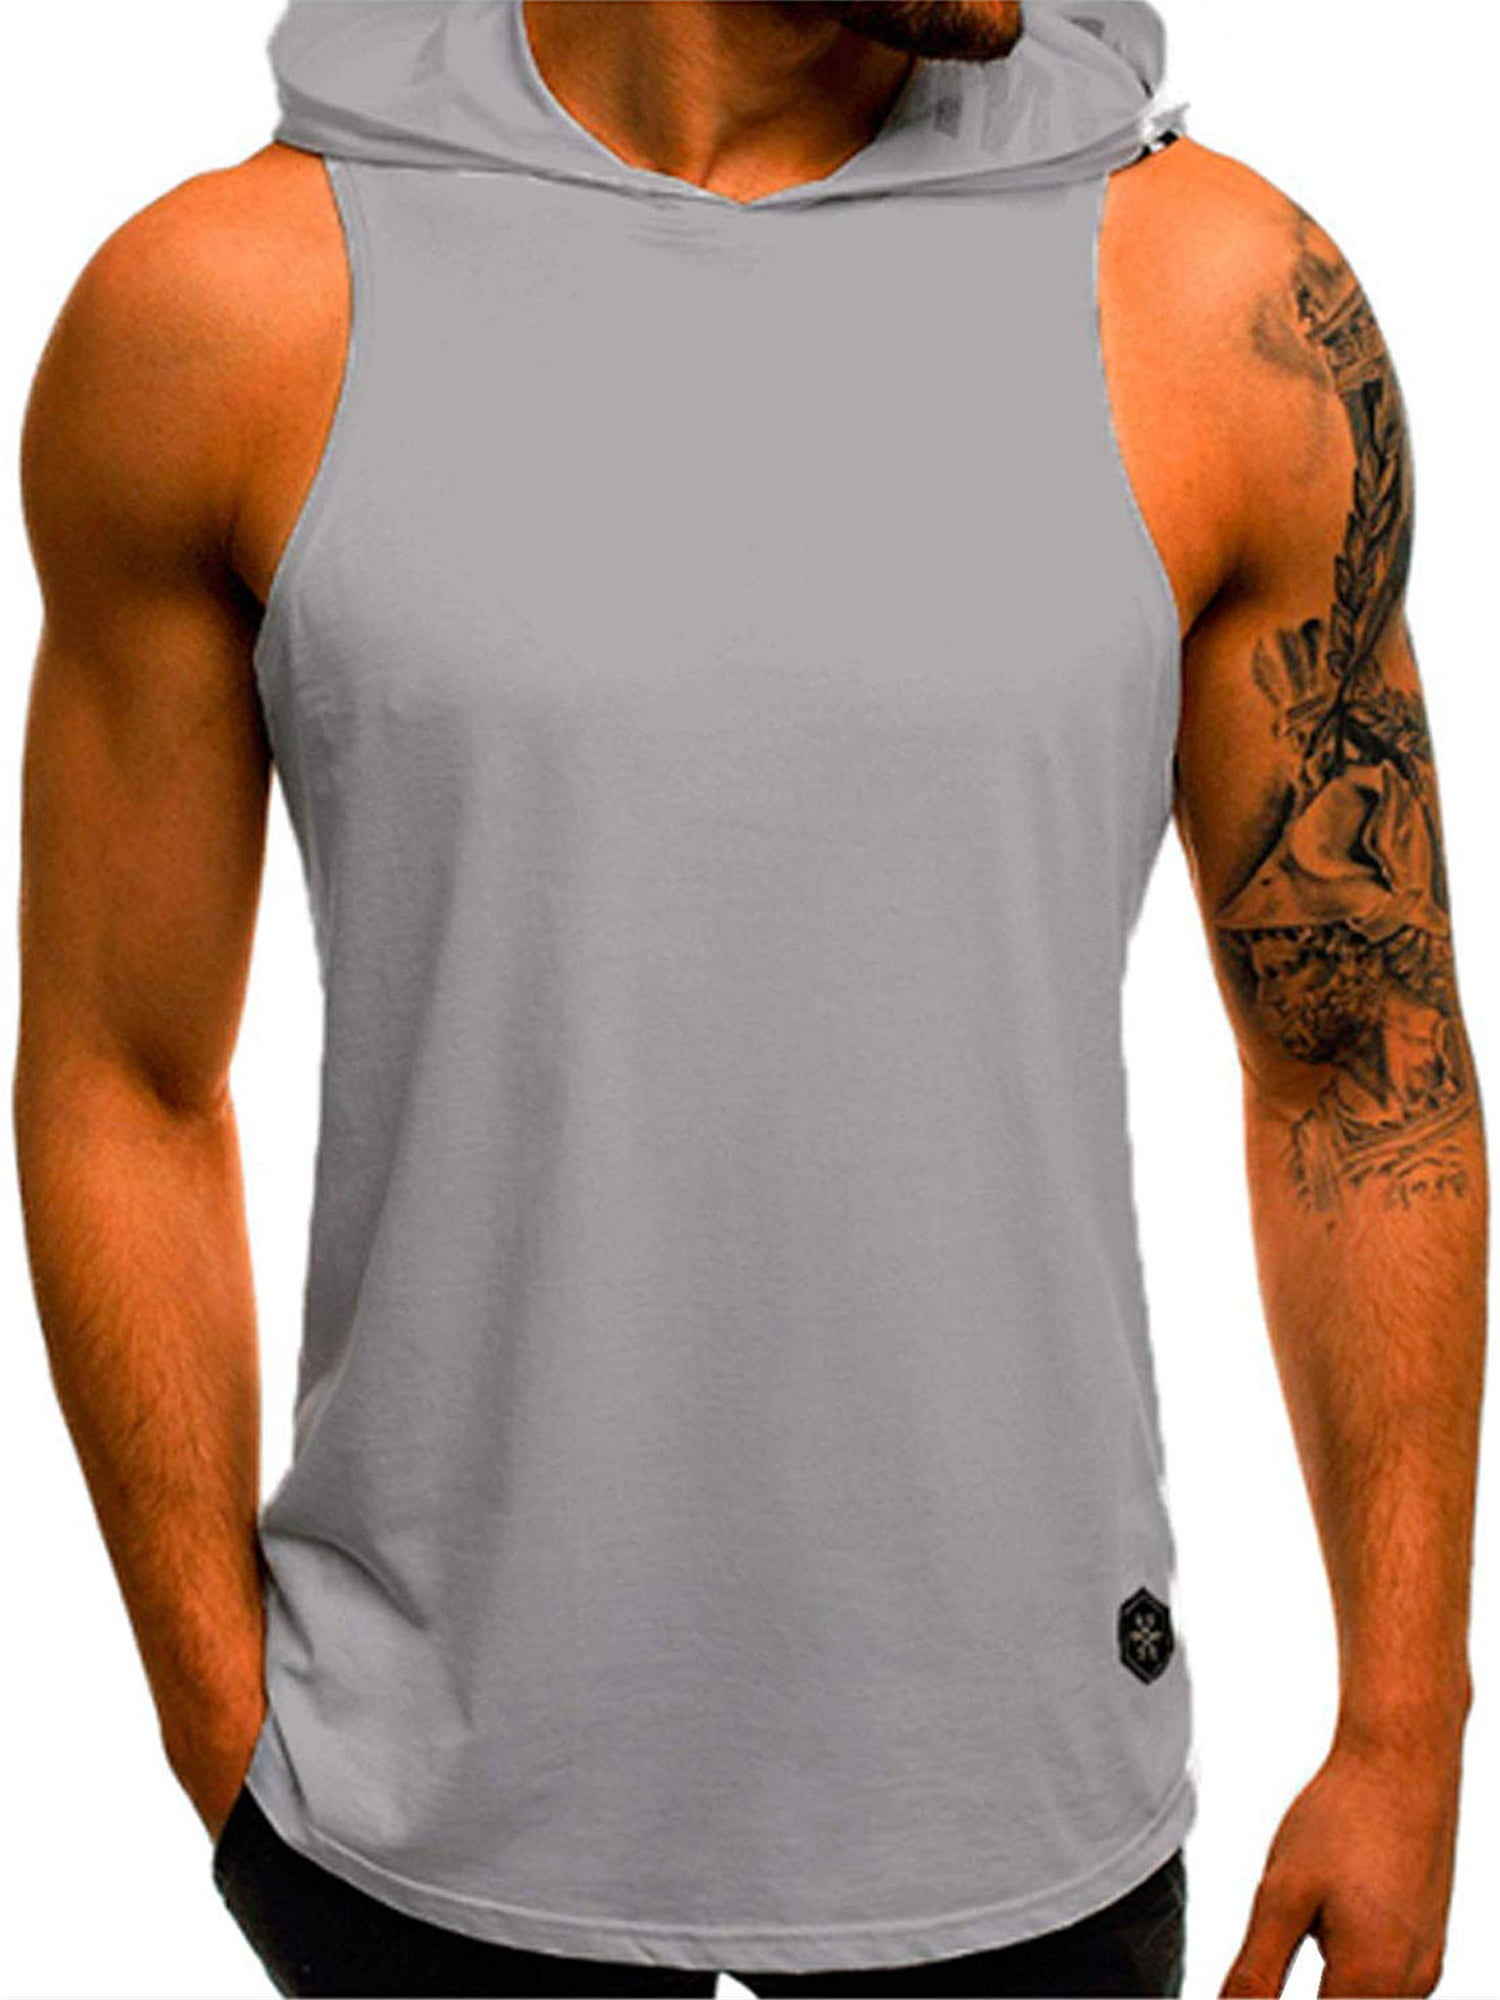 7789 Men's Sport Workout Hooded Tank Tops with Face Cover Sleeveless Gym T-Shirt Muscles Tees with Hood 